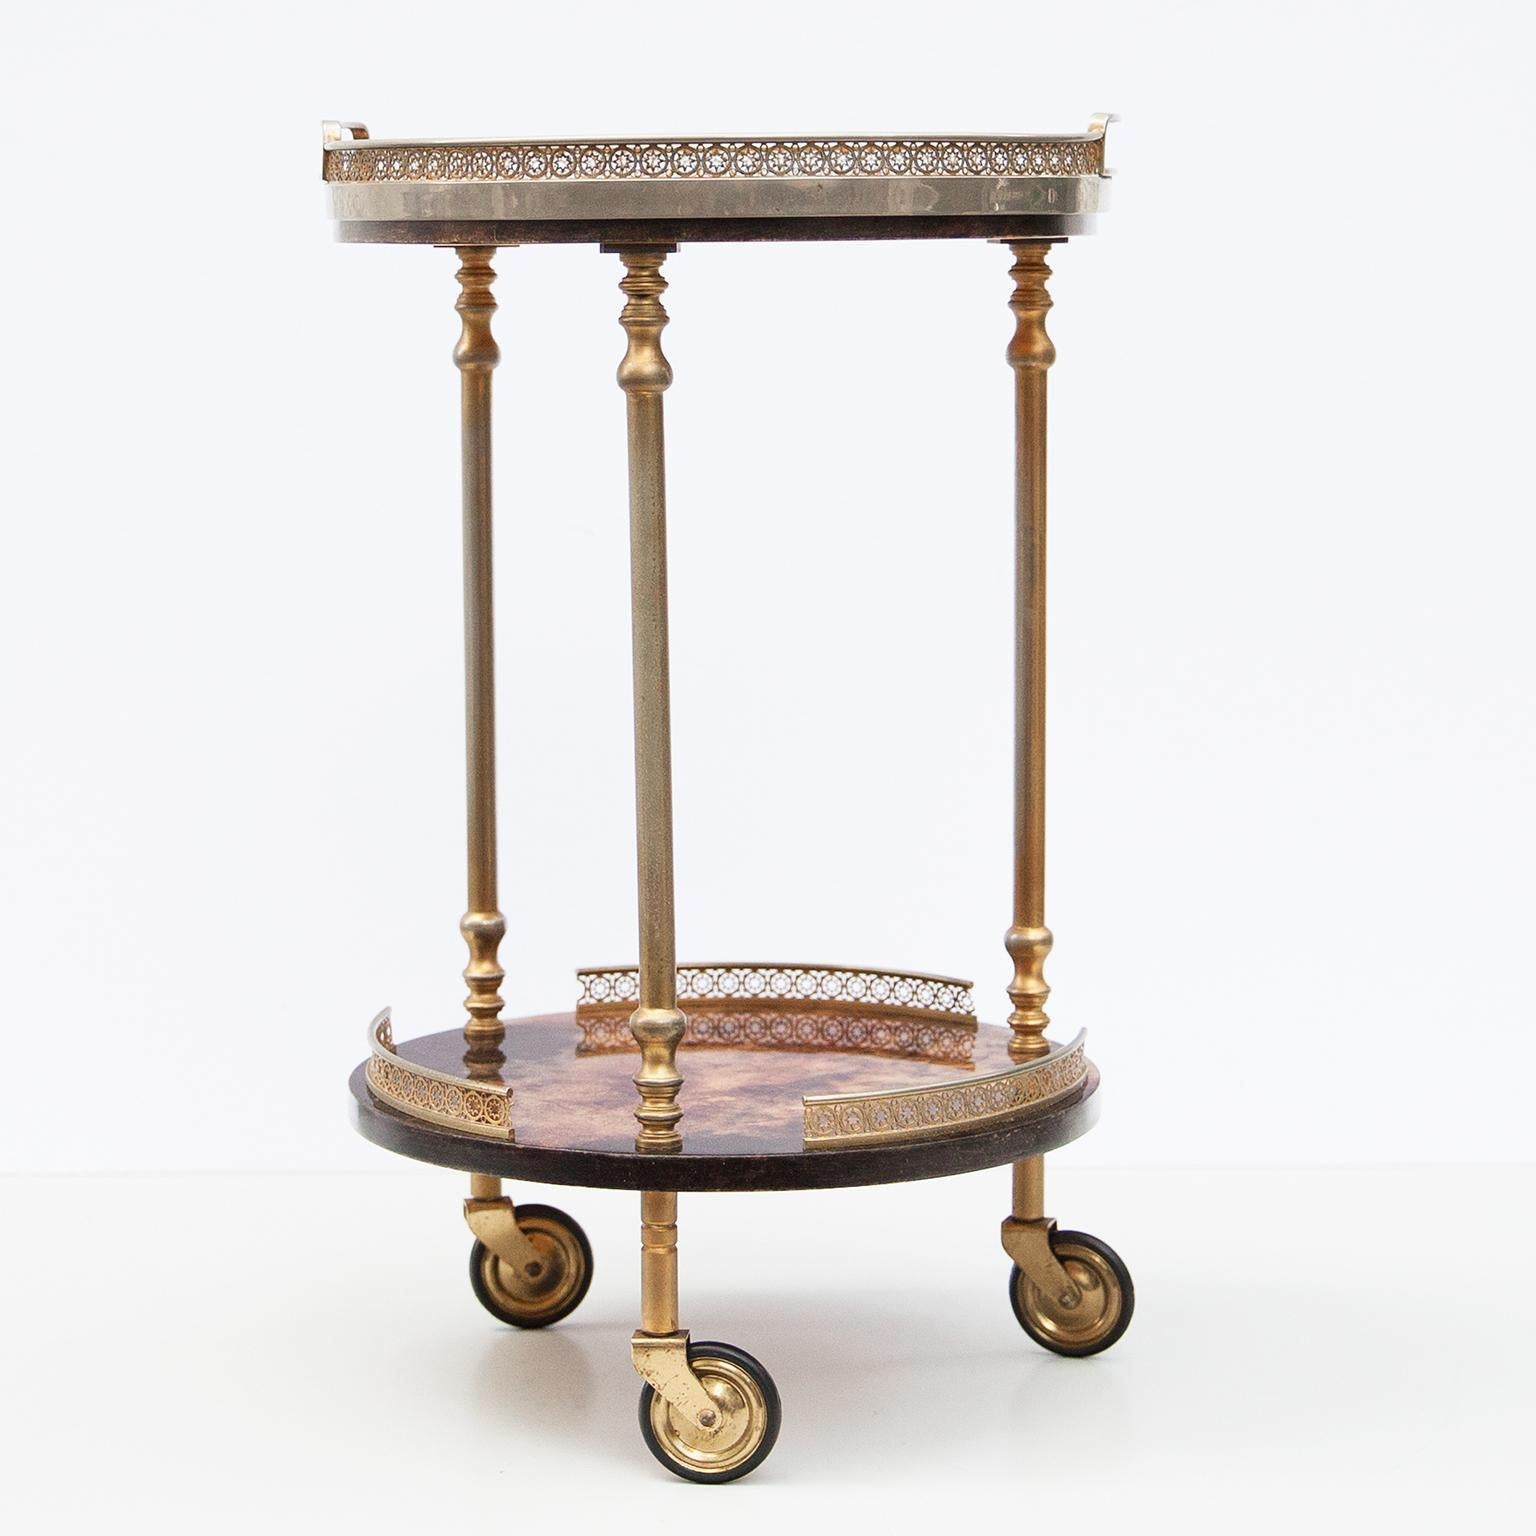 Fine bar or serving cart by Aldo Tura Milan, Italy 1960s in very good vintage condition. The wooden frame is covered with brown colored goatskin, varnished in clear acrylic lacquer and polished brass with a removable glass tray.
This particular